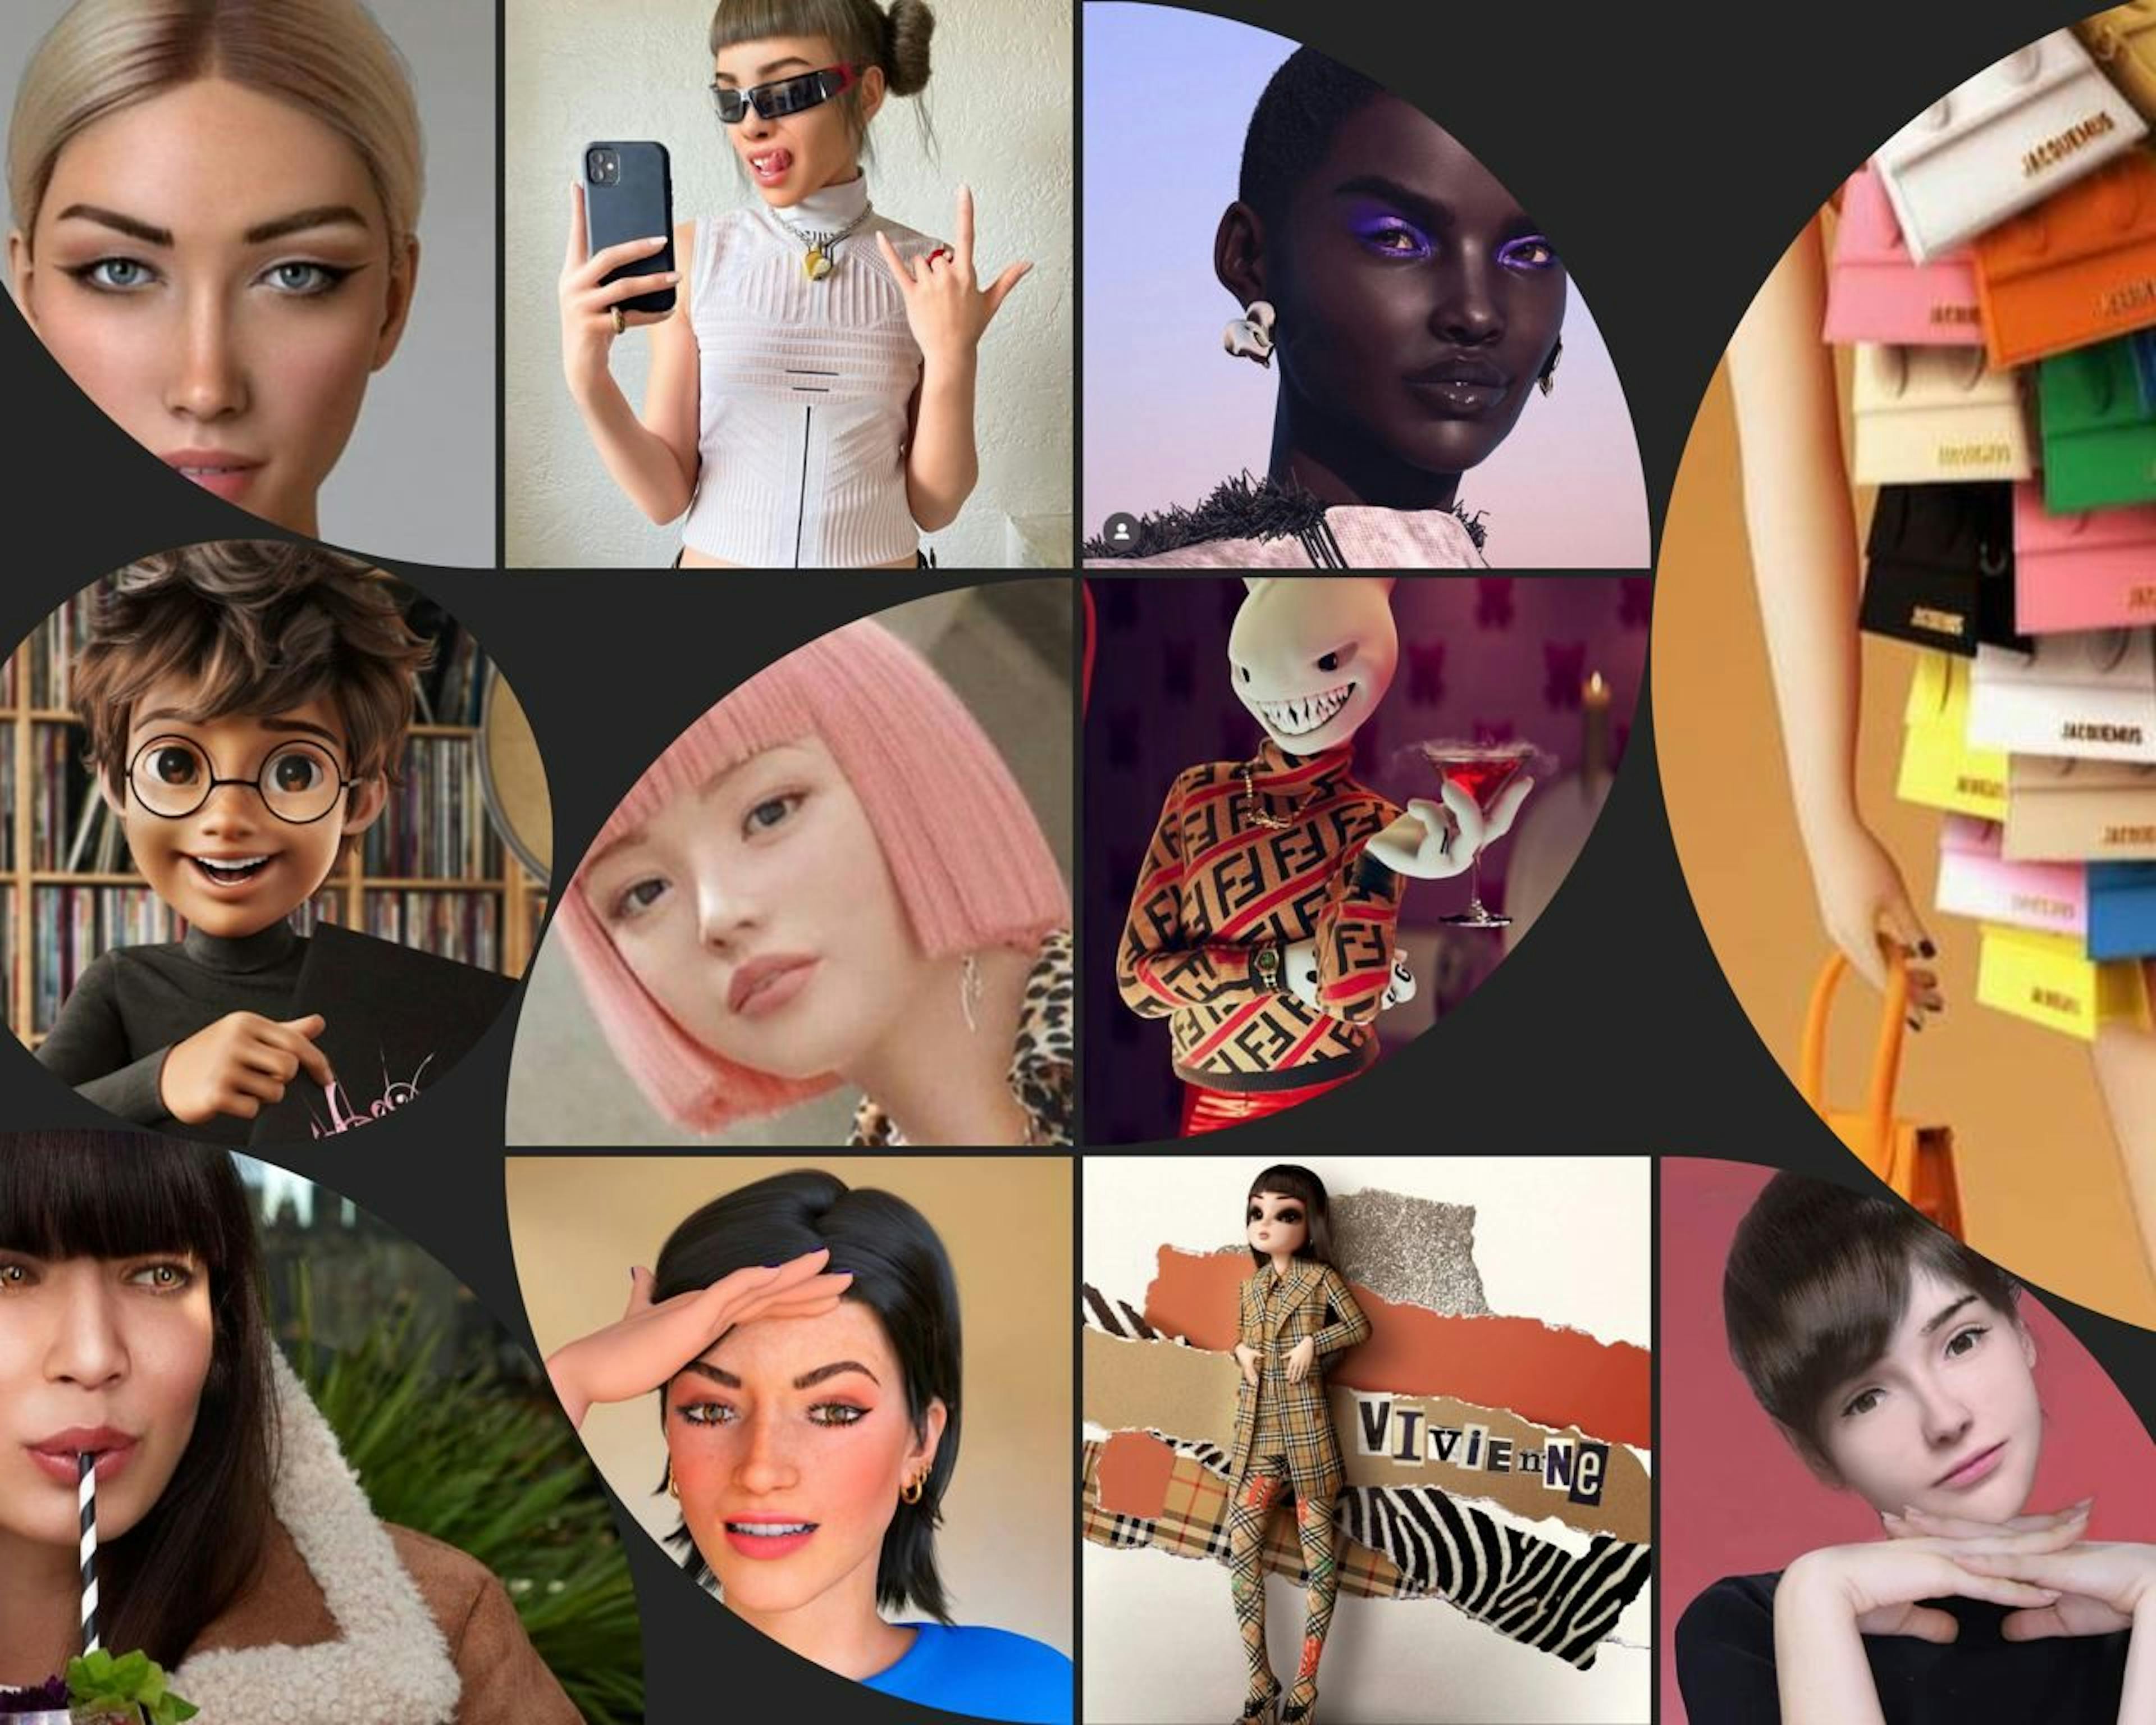 featured image - Virtual Influencers: Assessing Their True Marketing Impact and Ability to Bond With Followers